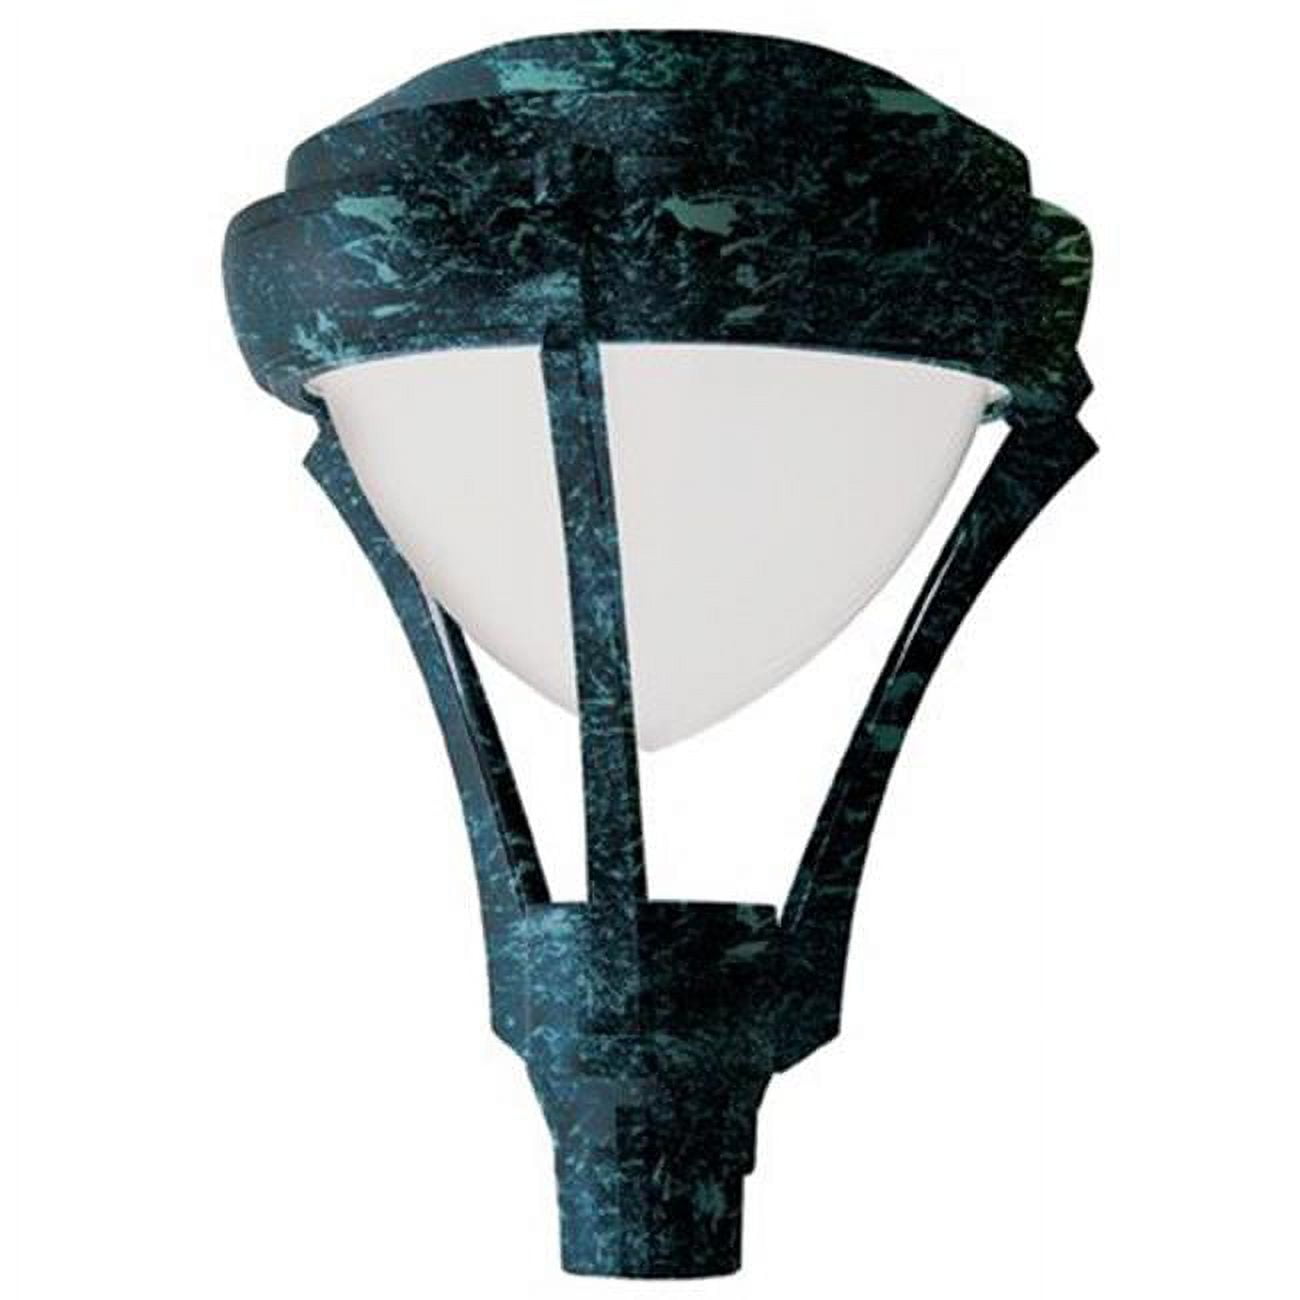 Picture of Dabmar Lighting GM595-VG 35W 120V Powder Coated Cast Aluminum Post Top Light Fixture with Metal Halide Lamp, Verde Green - 27.95 x 21.65 x 21.65 in.